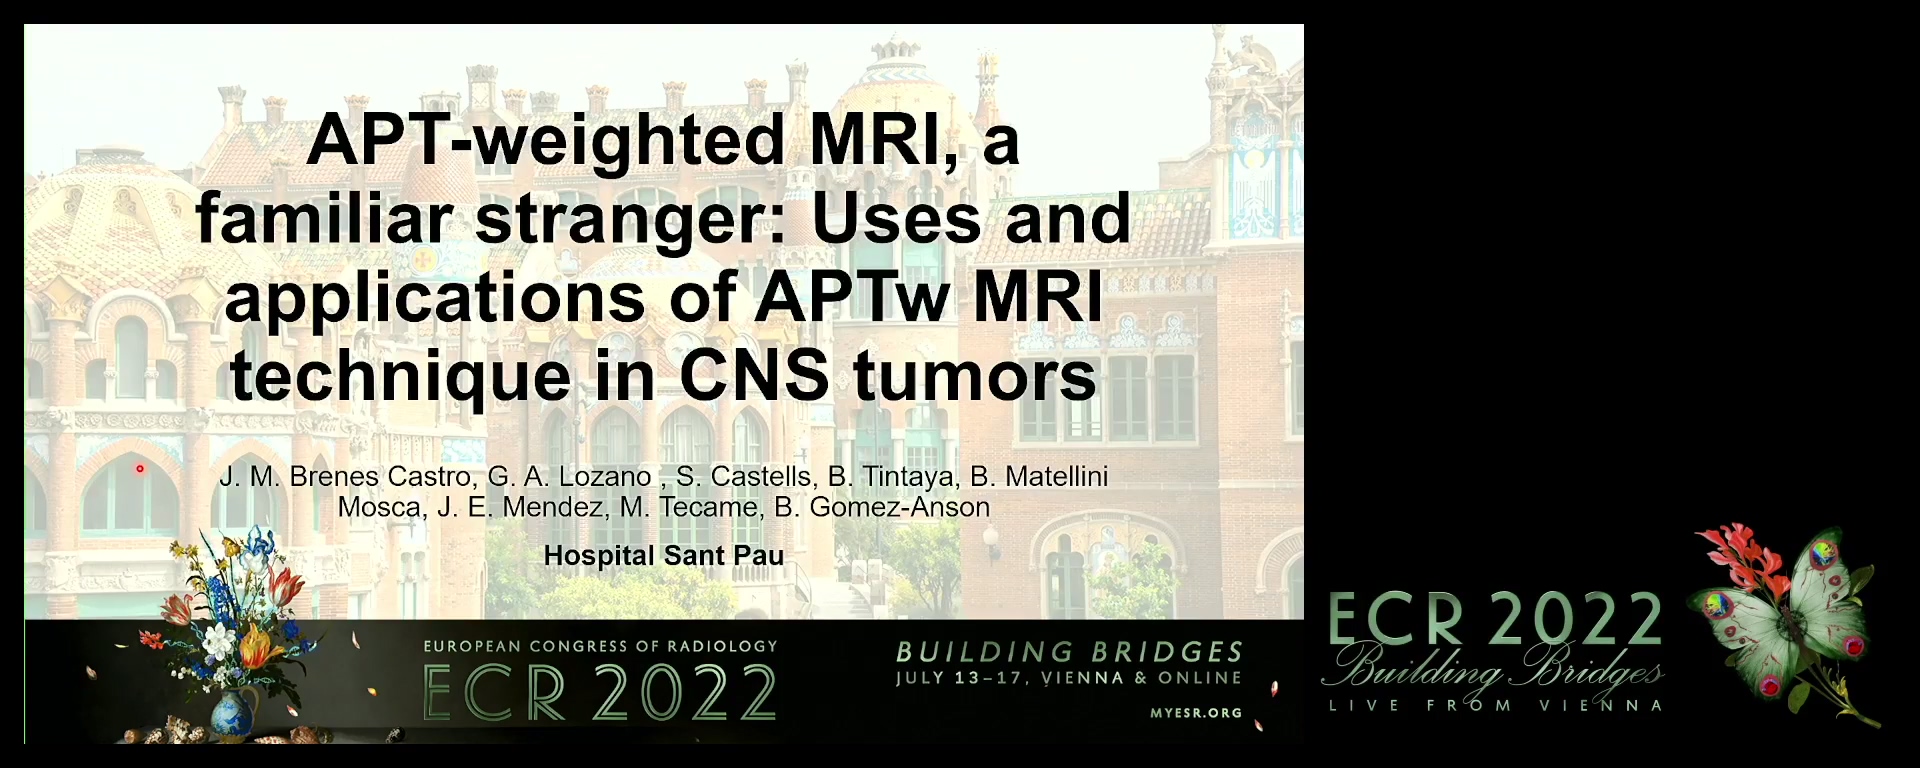 APT-weighted MRI, a familiar stranger: uses and applications of APTw MRI technique in CNS tumours